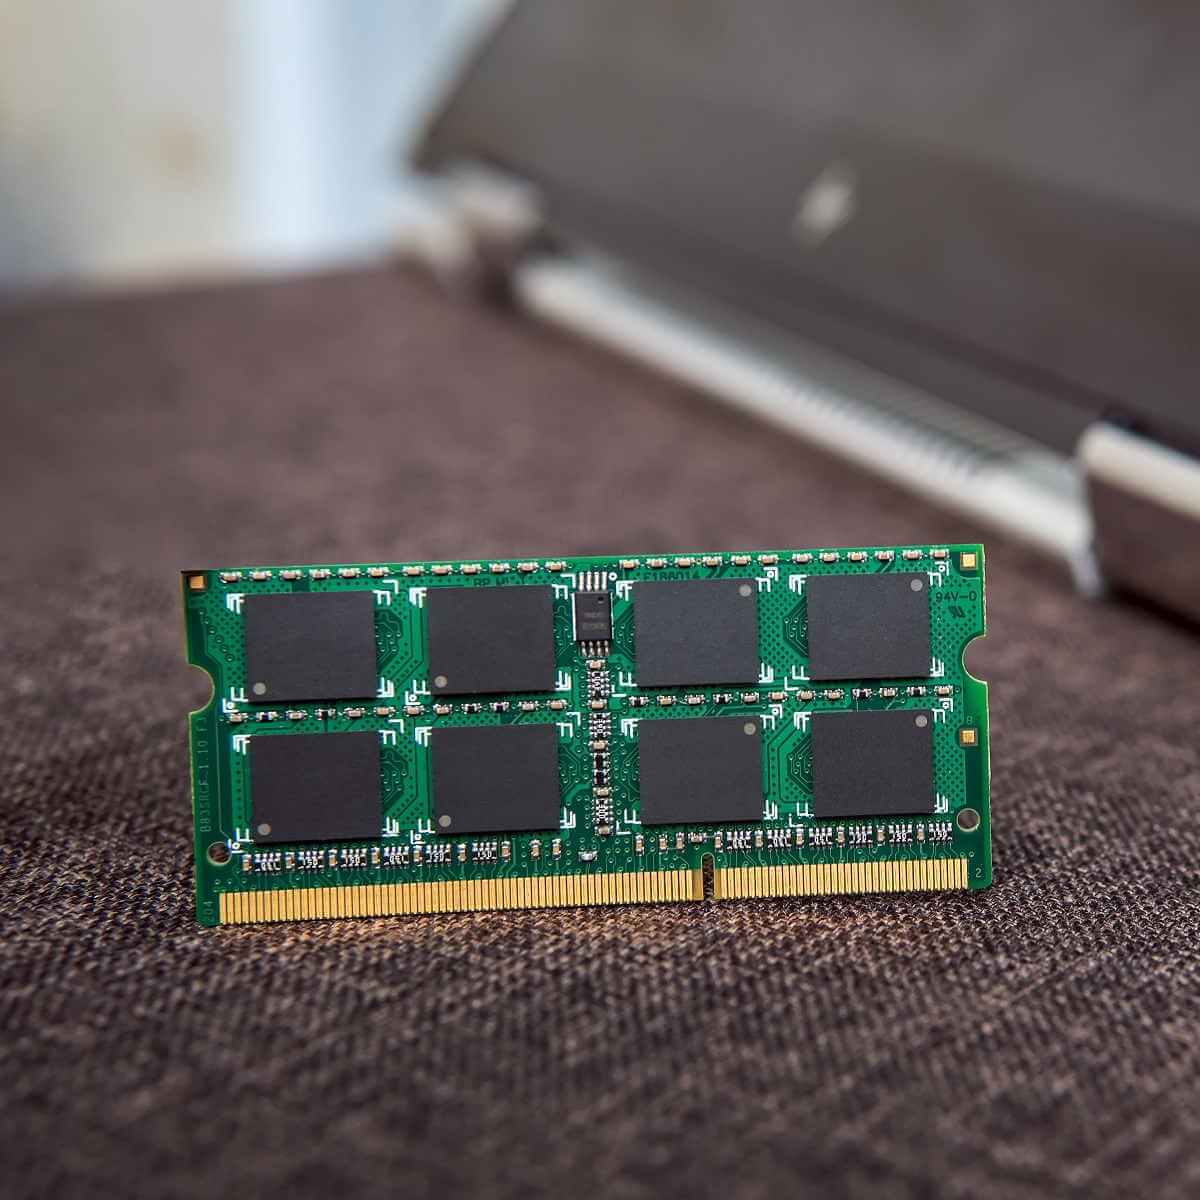 micron is sampling ddr5 in data centres